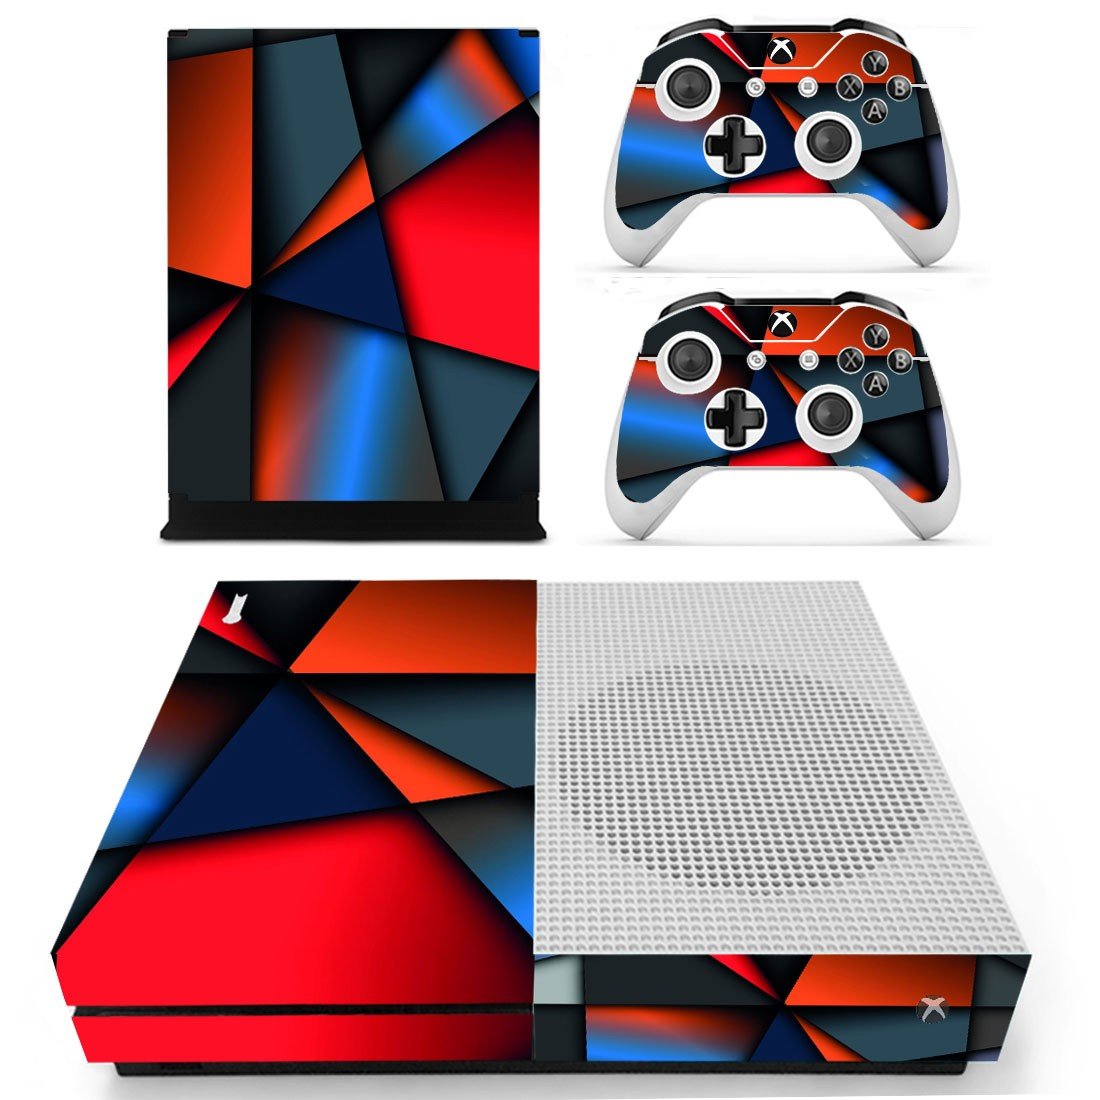 Xbox One S And Controllers Skin Cover Tech Design 9